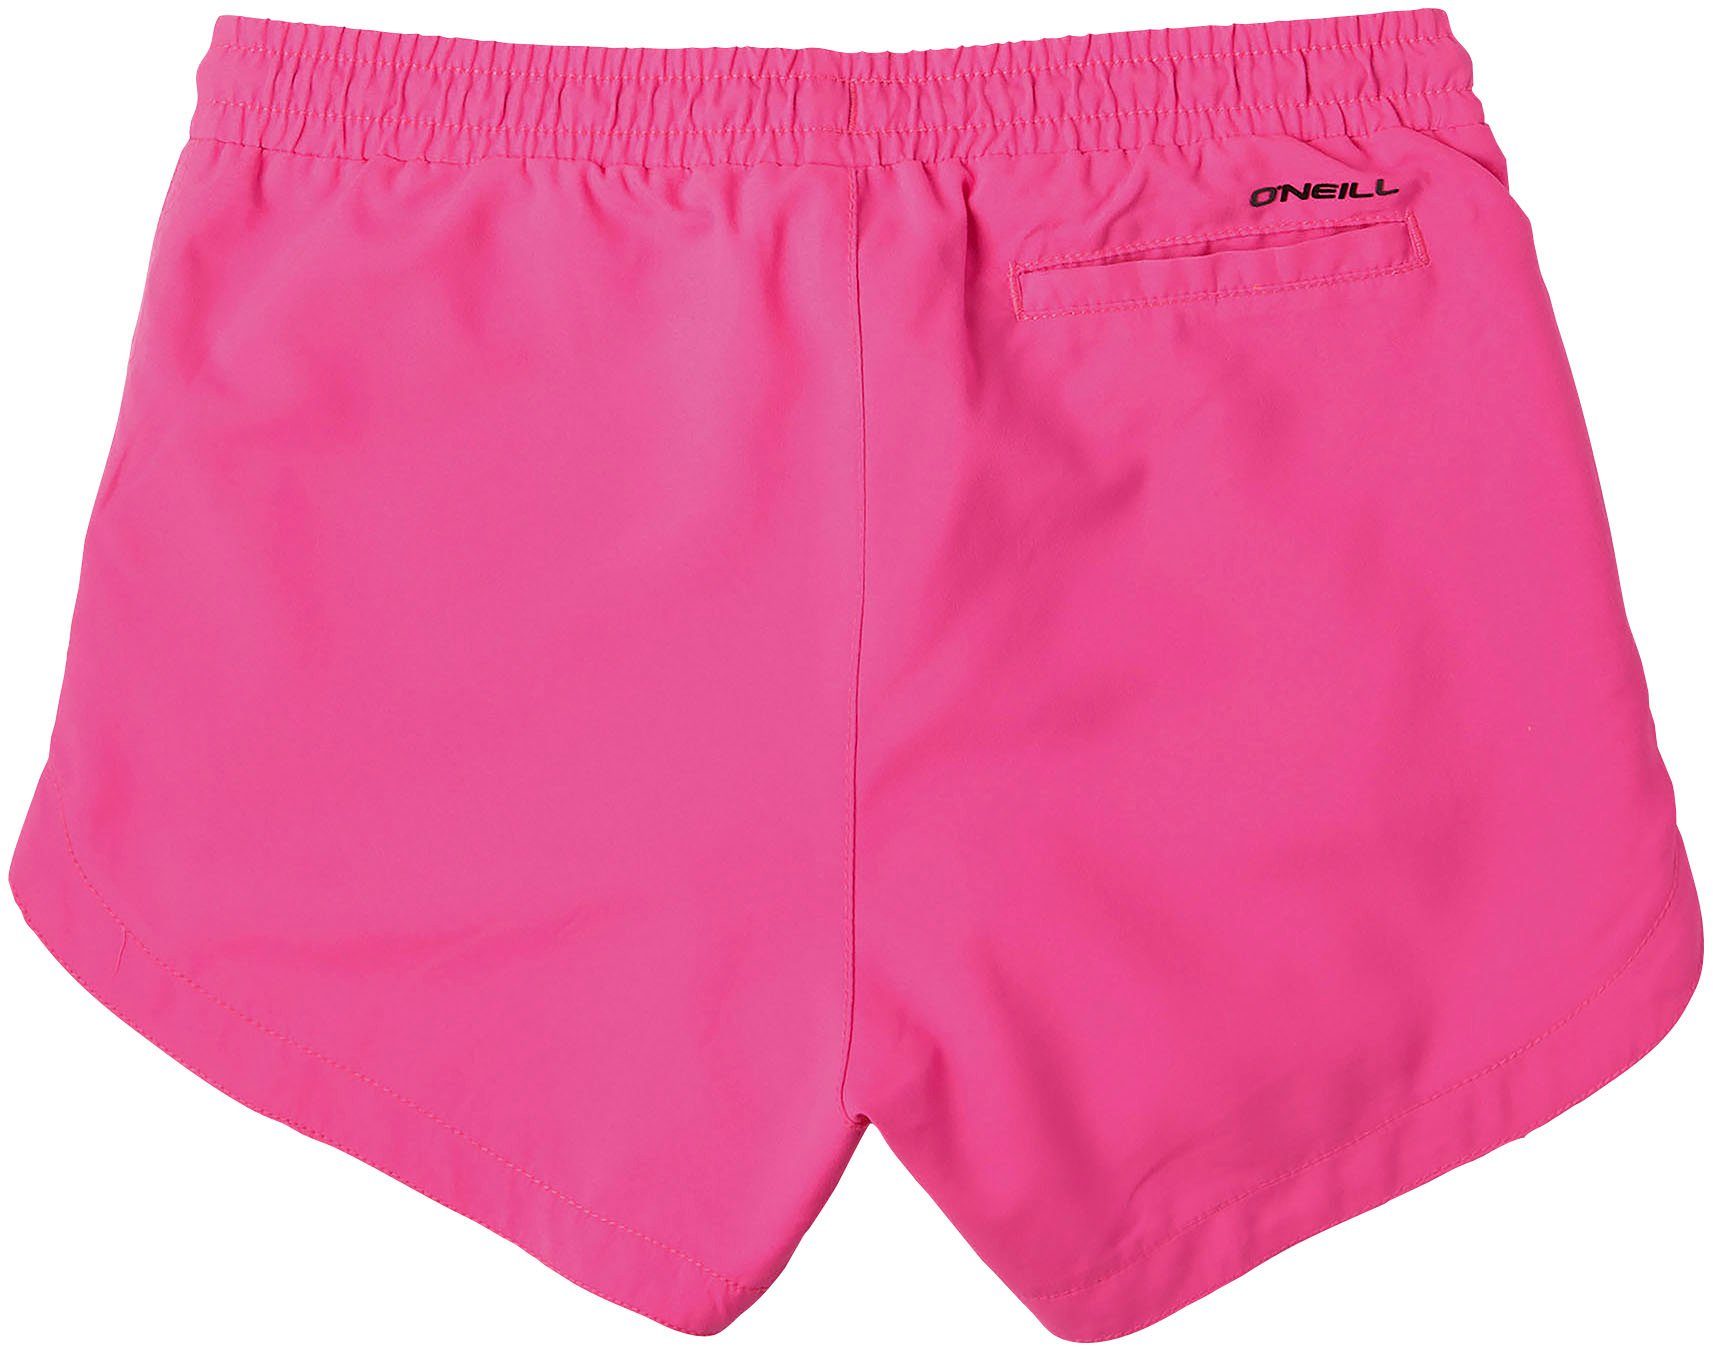 ANGLET ESSENTIALS Badeshorts O'Neill SOLID pink SWIMSHORTS